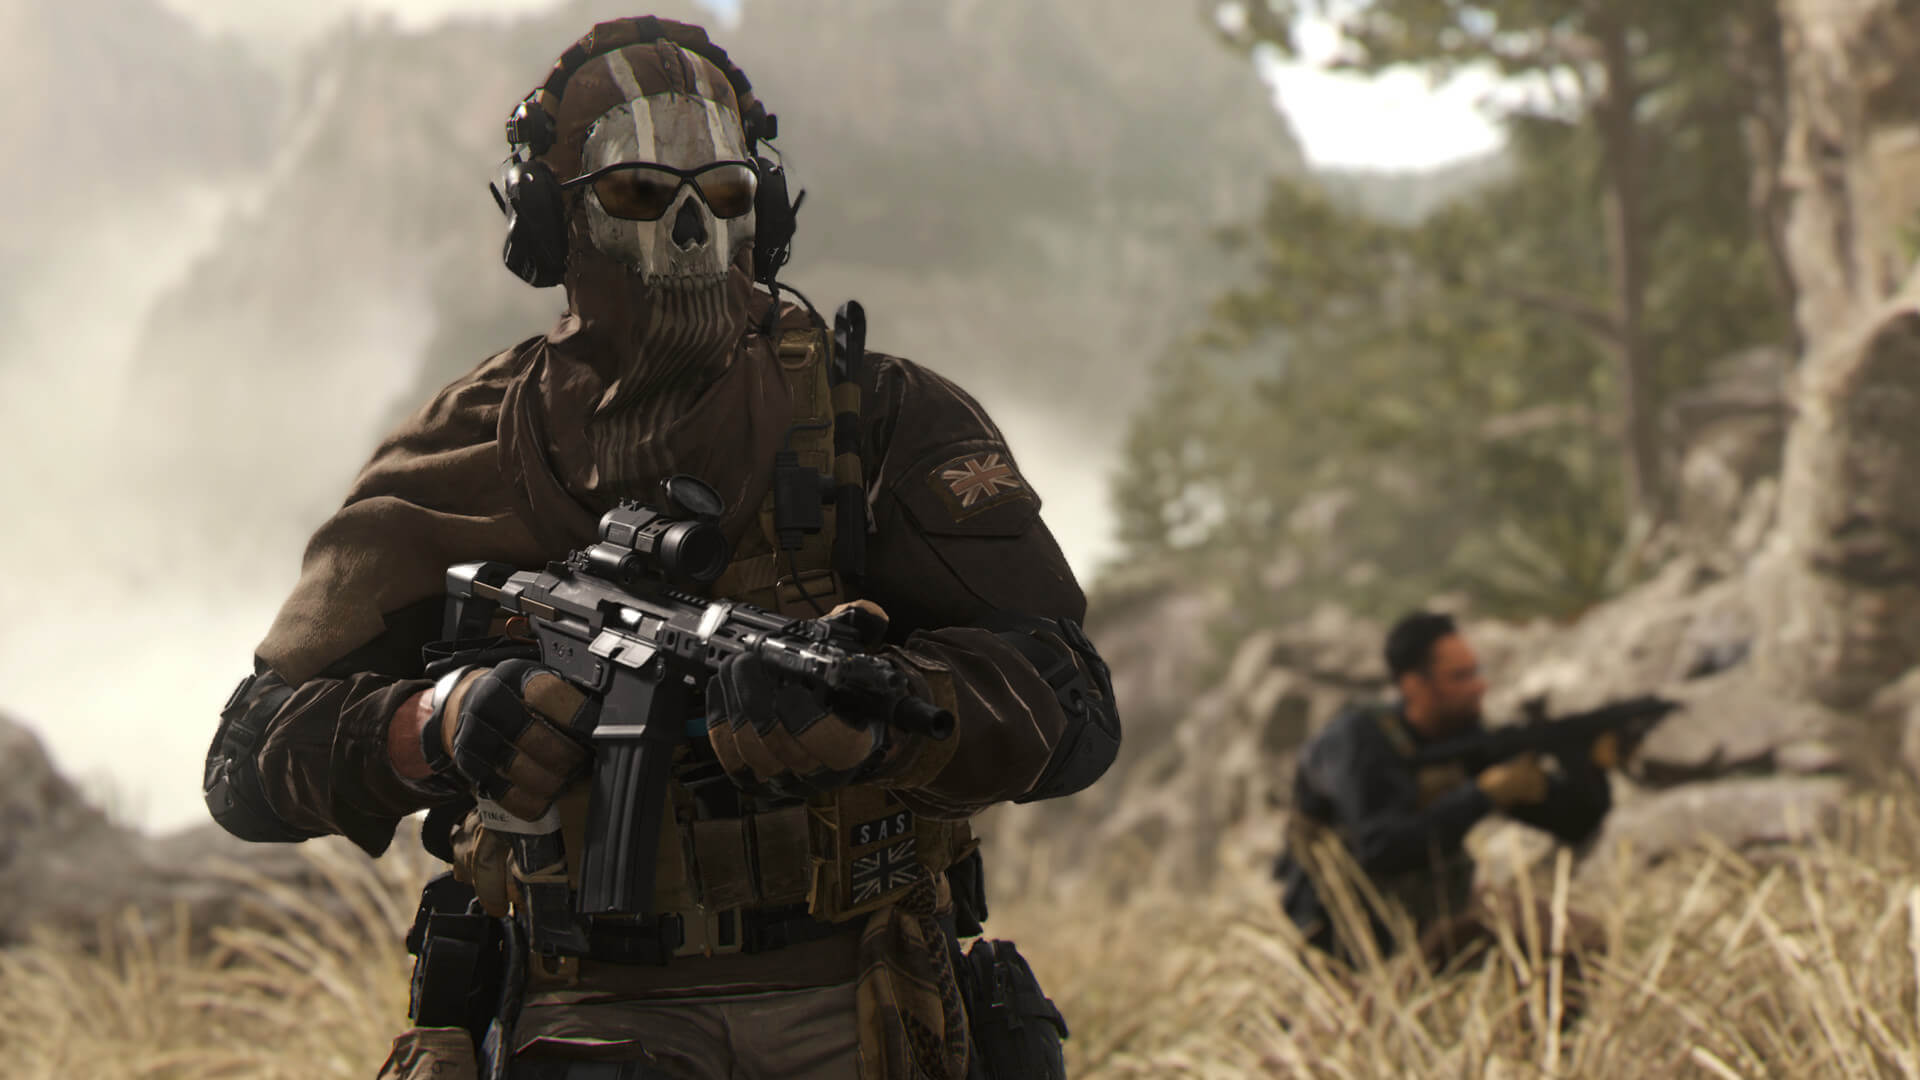 A soldier in sunglasses and a mask looking menacing in Call of Duty: Modern Warfare 2